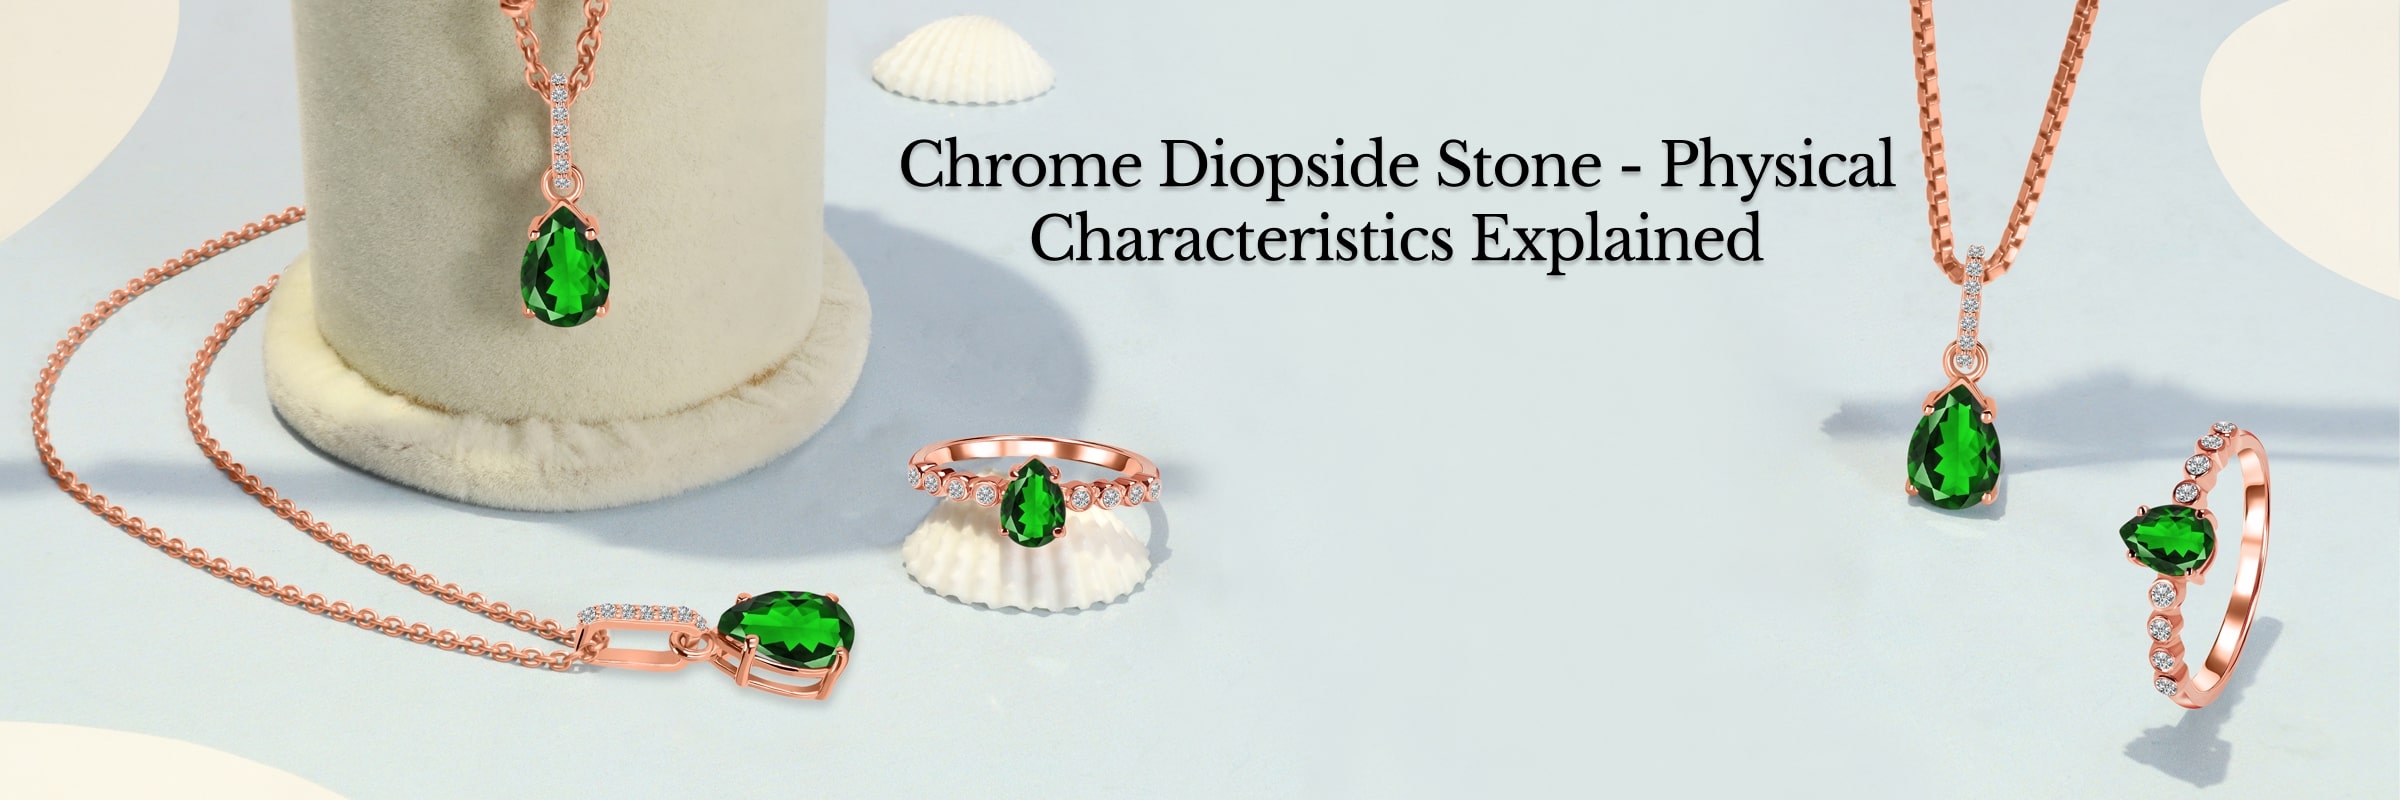 Physical Properties of Chrome Diopside Stone